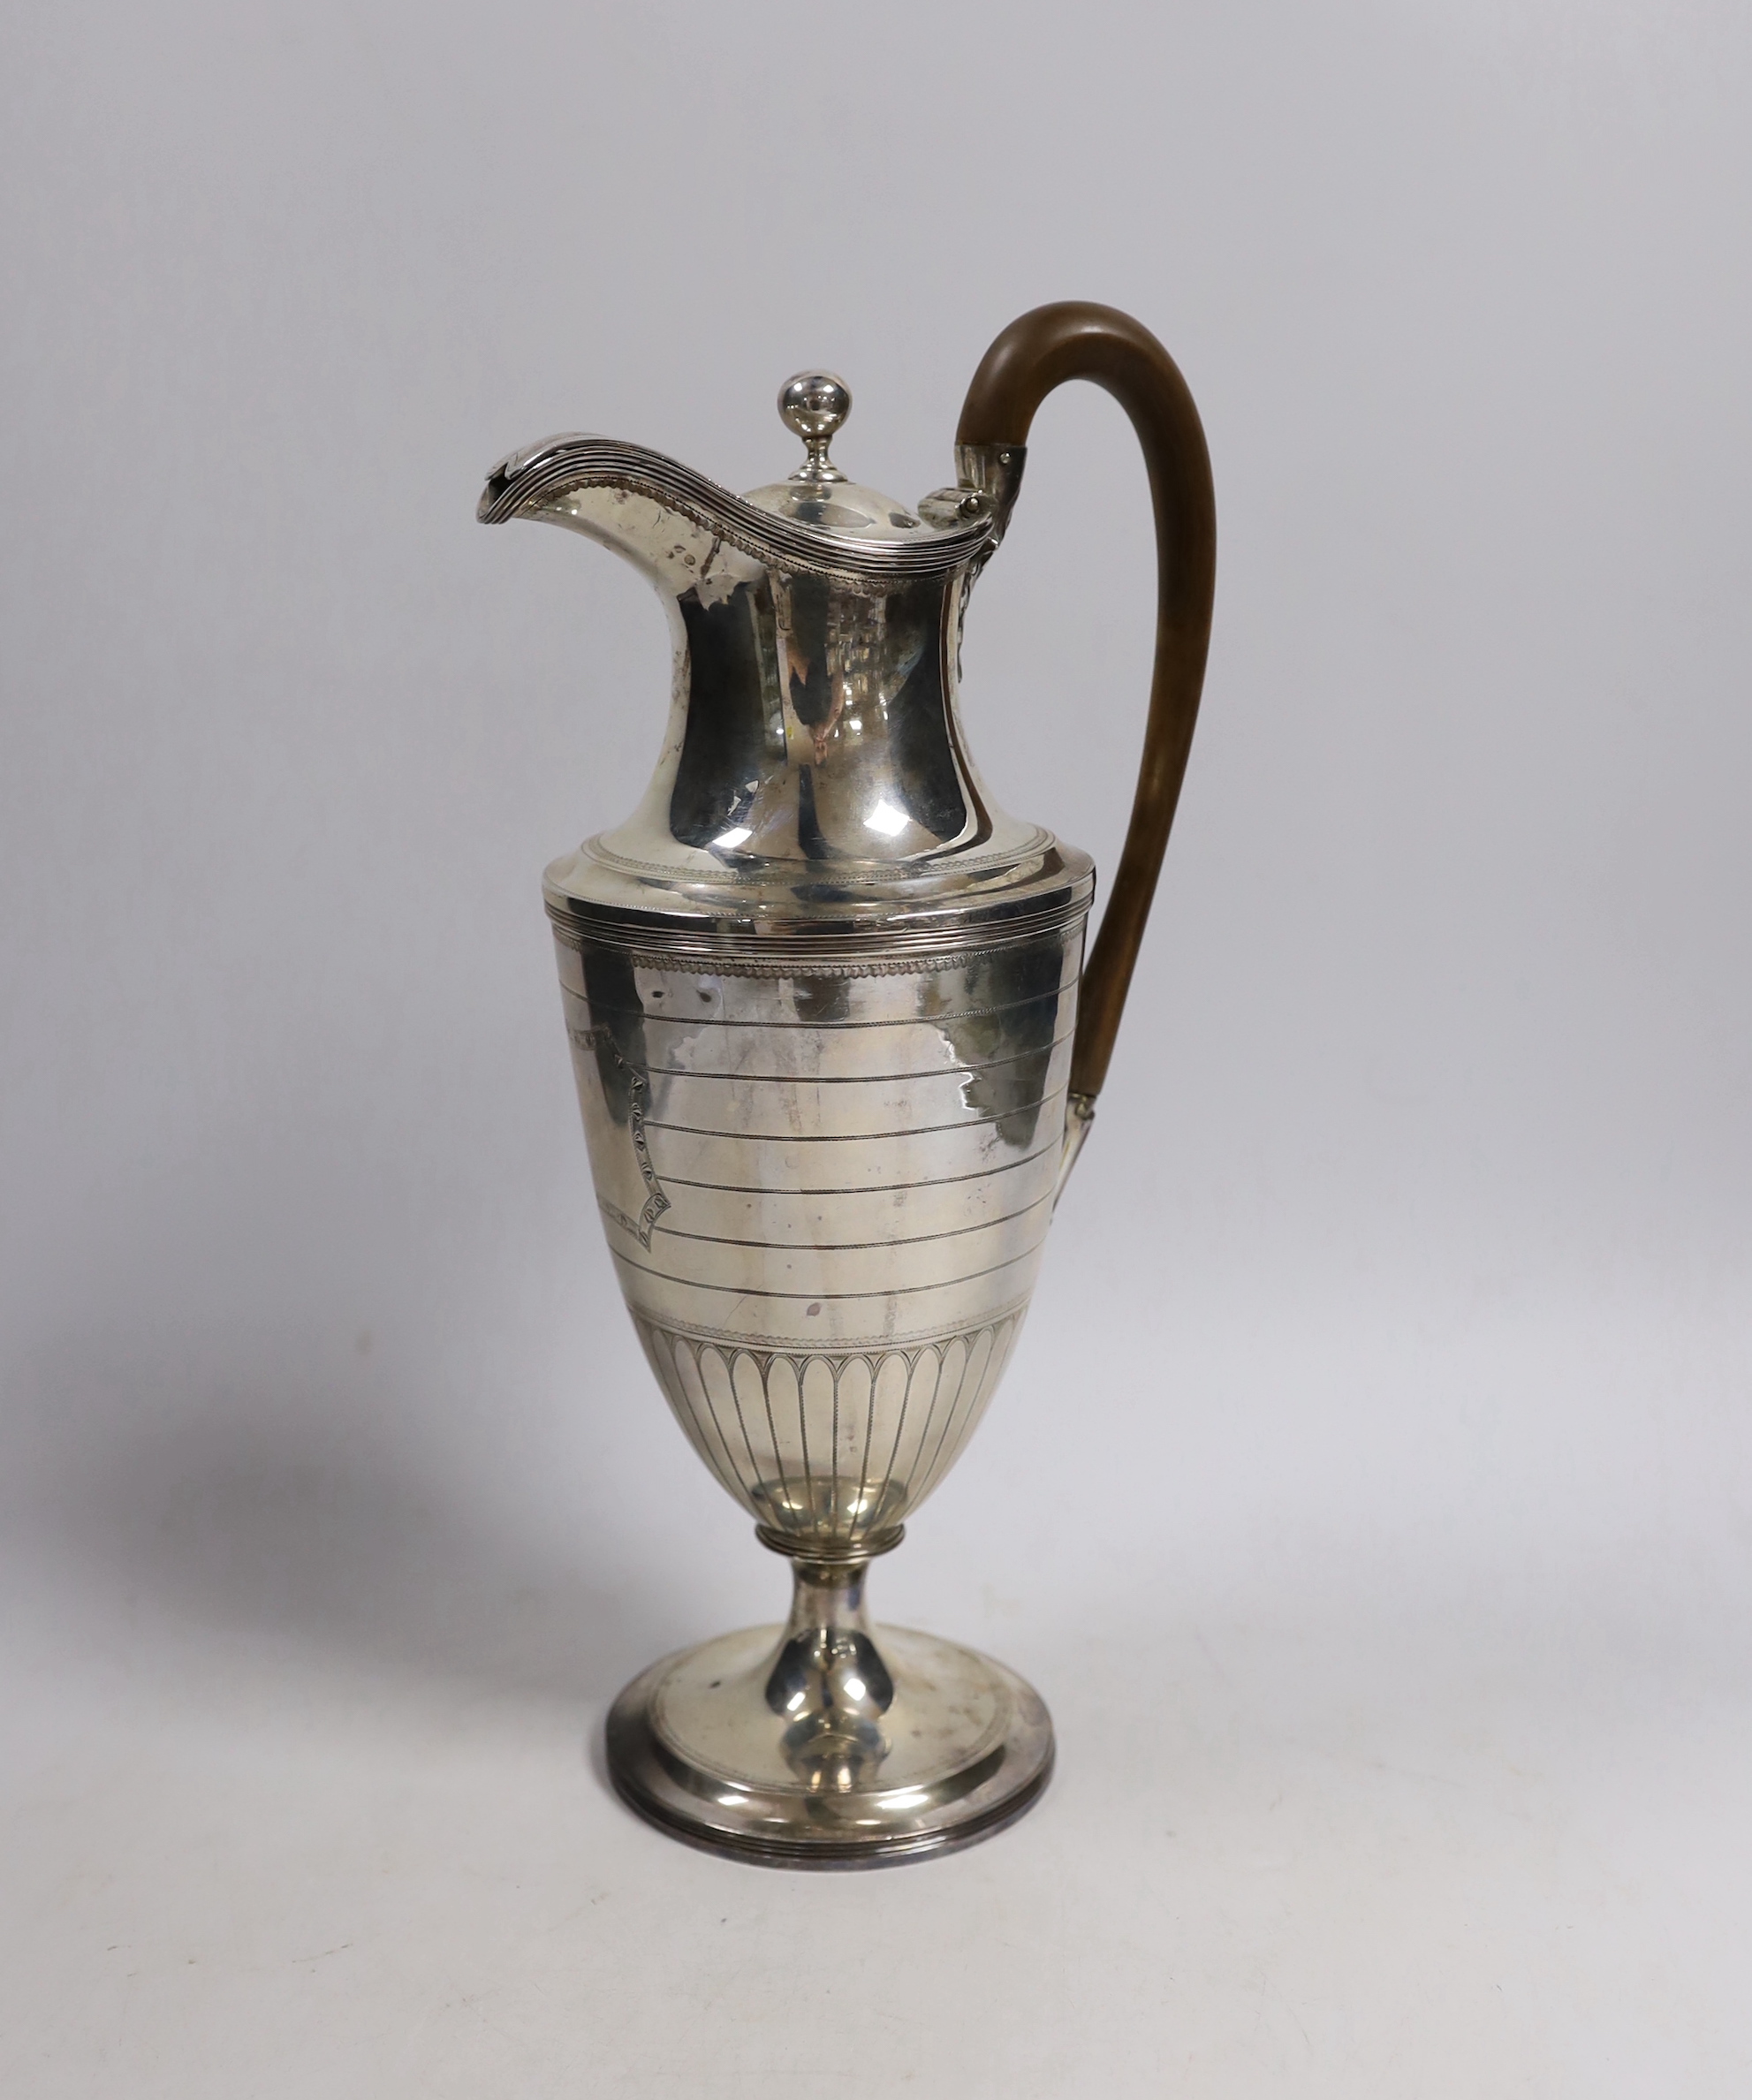 A George III silver hot water pot, London, 1792, by Henry Chawner, height 30.3cm, gross weight 12.8oz.